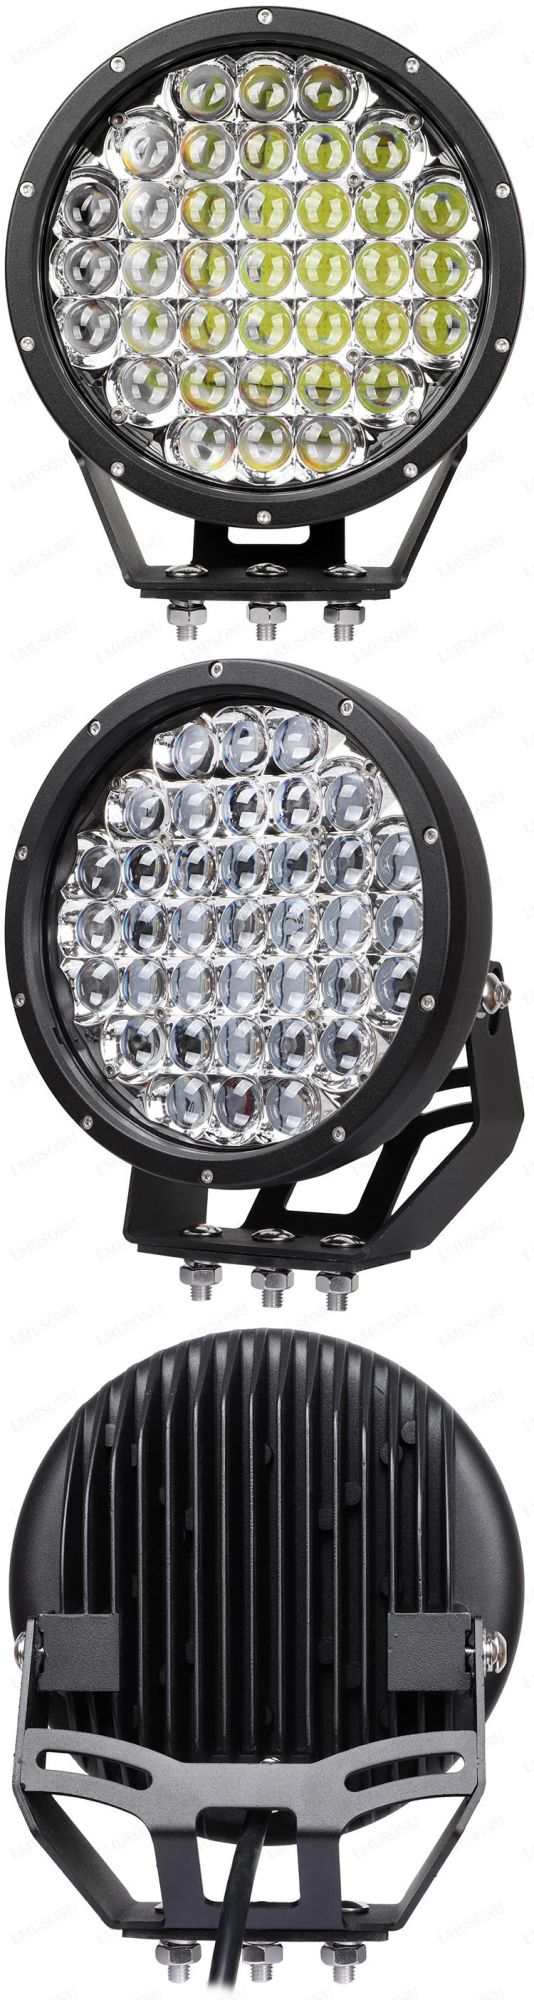 9.0 Inch 370W 4X4 Offroad Auxiliary 5D LED Driving Work Light Fog Lamp for Auto Car Truck Boat